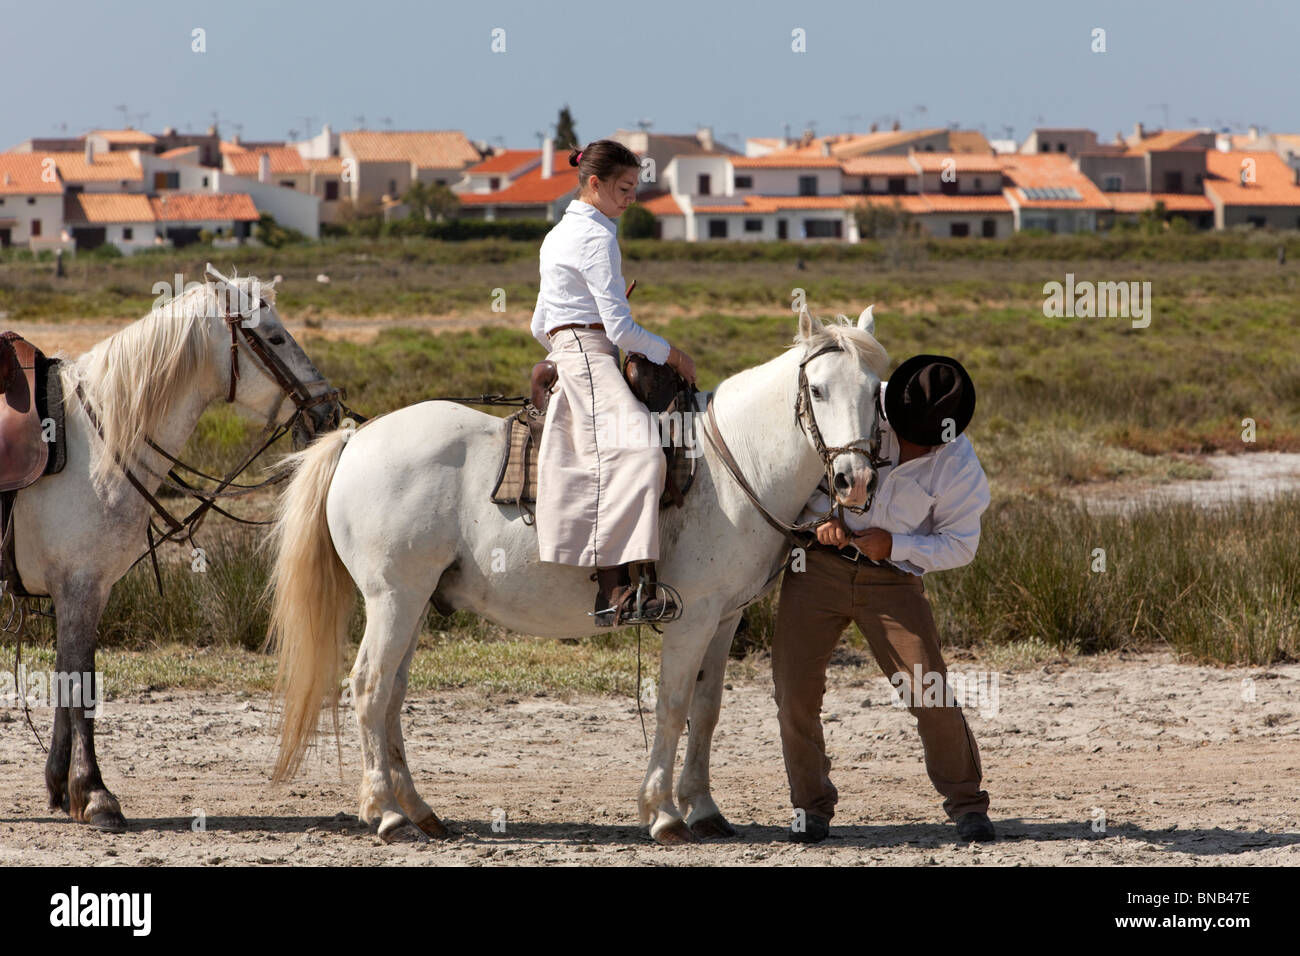 young female gardian, cowgirl of the Camargue region, on her horse, cowboy helping with the horses bridle Stock Photo